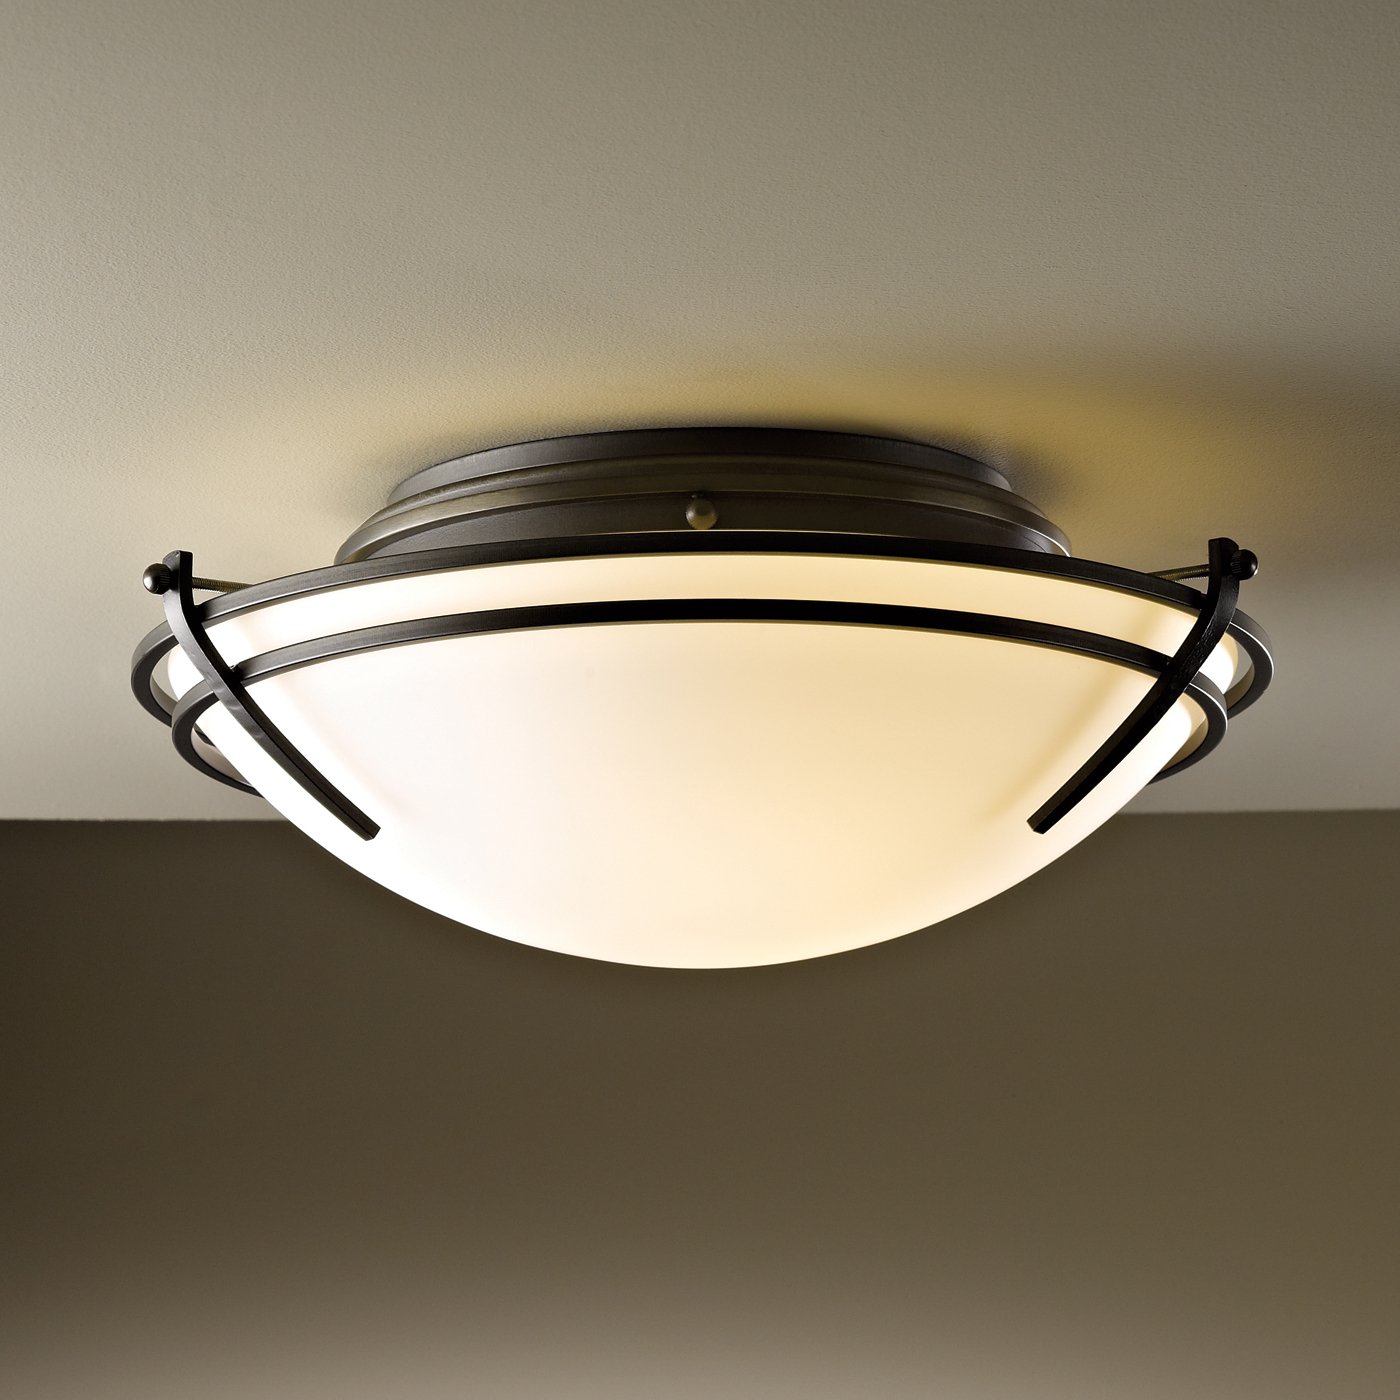 Ceiling Mounted Lights Photo 10 